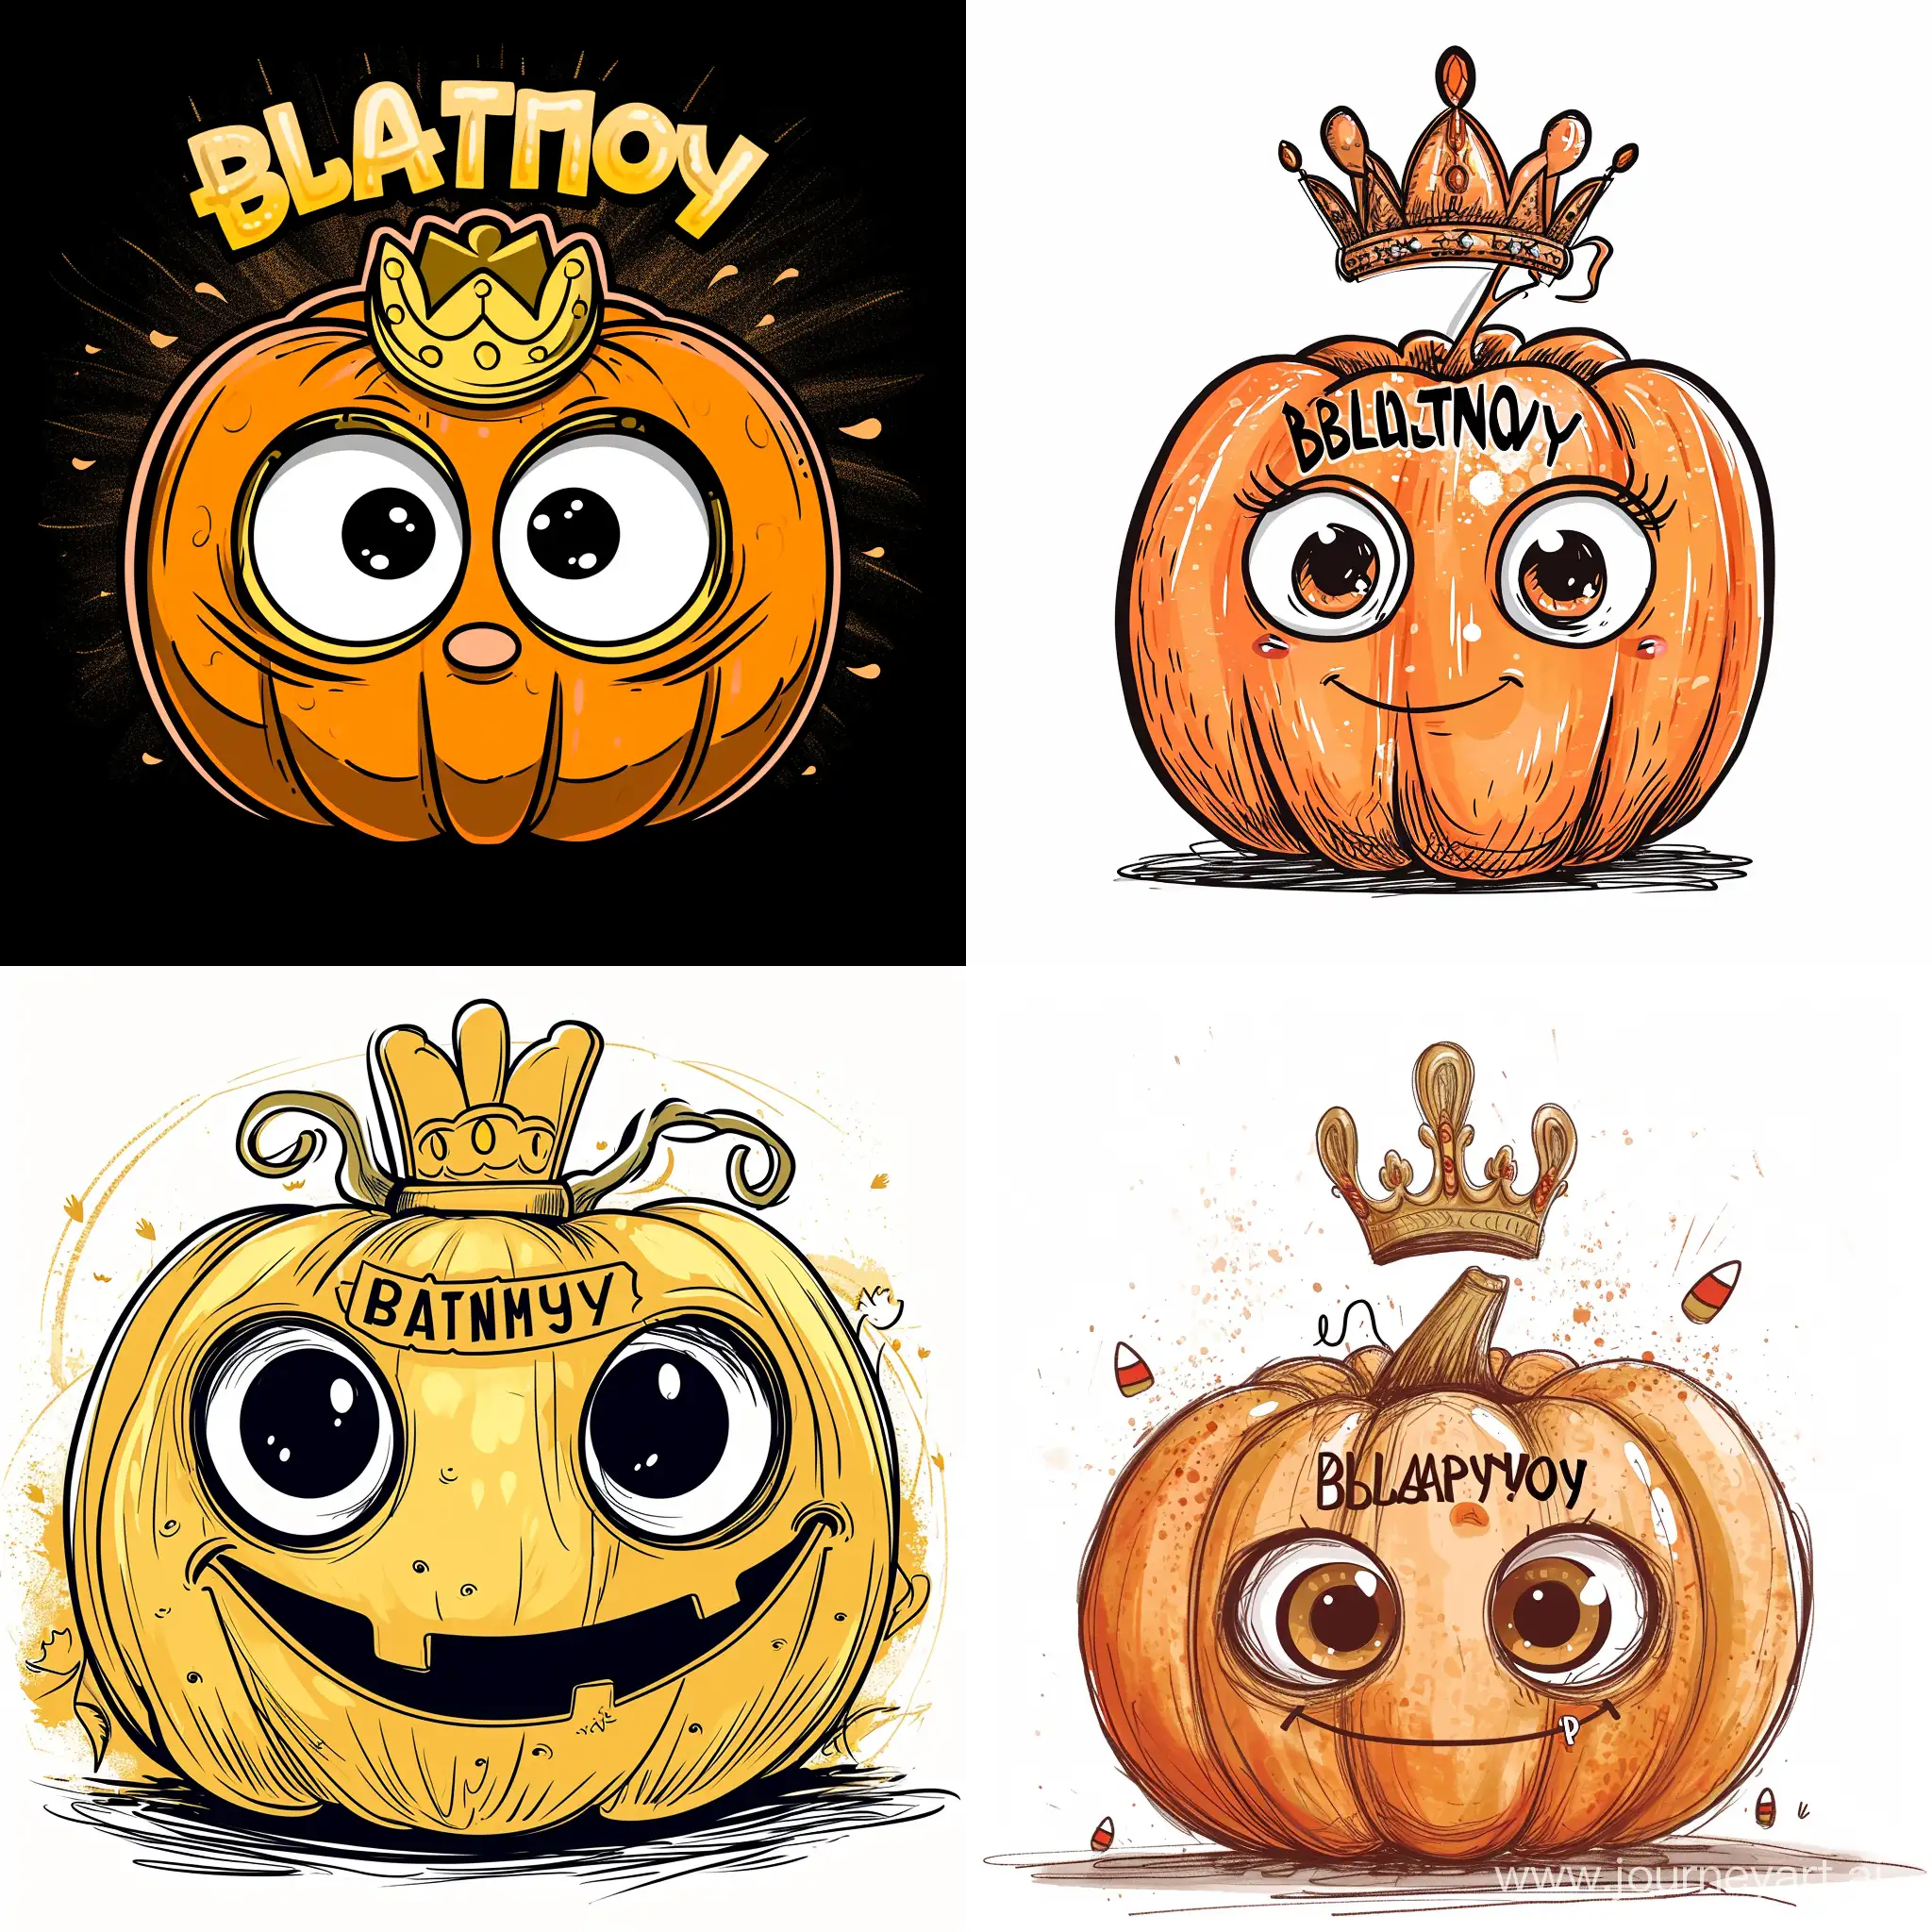 Cheerful-Pumpkin-with-BLATNOY-Inscription-and-Royal-Crown